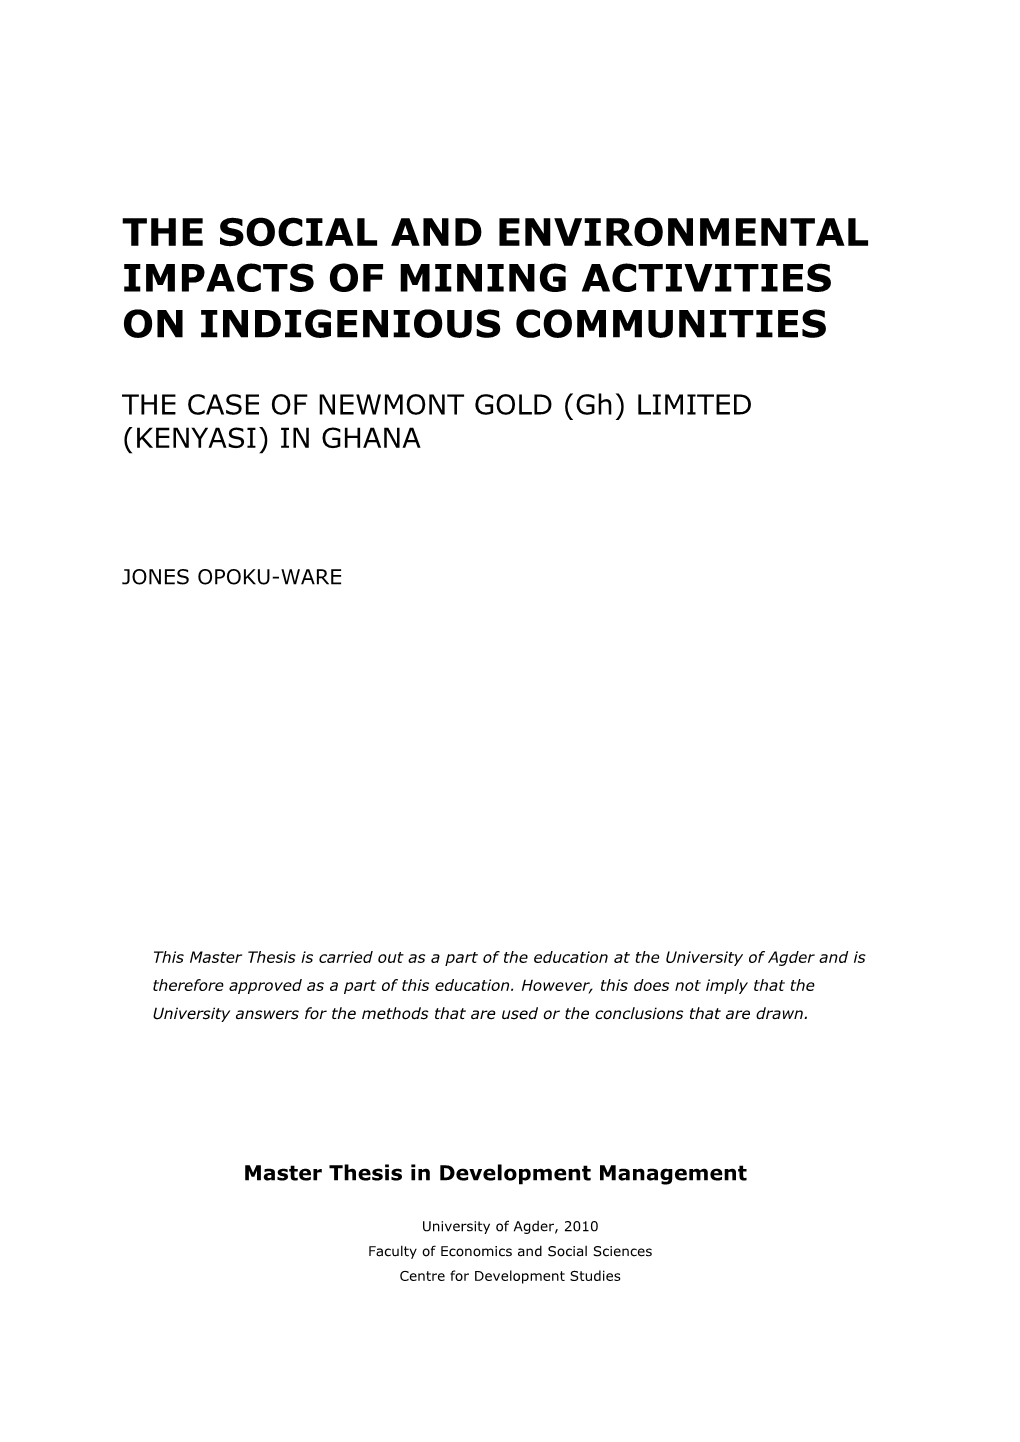 The Social and Environmental Impacts of Mining Activities on Indigenious Communities